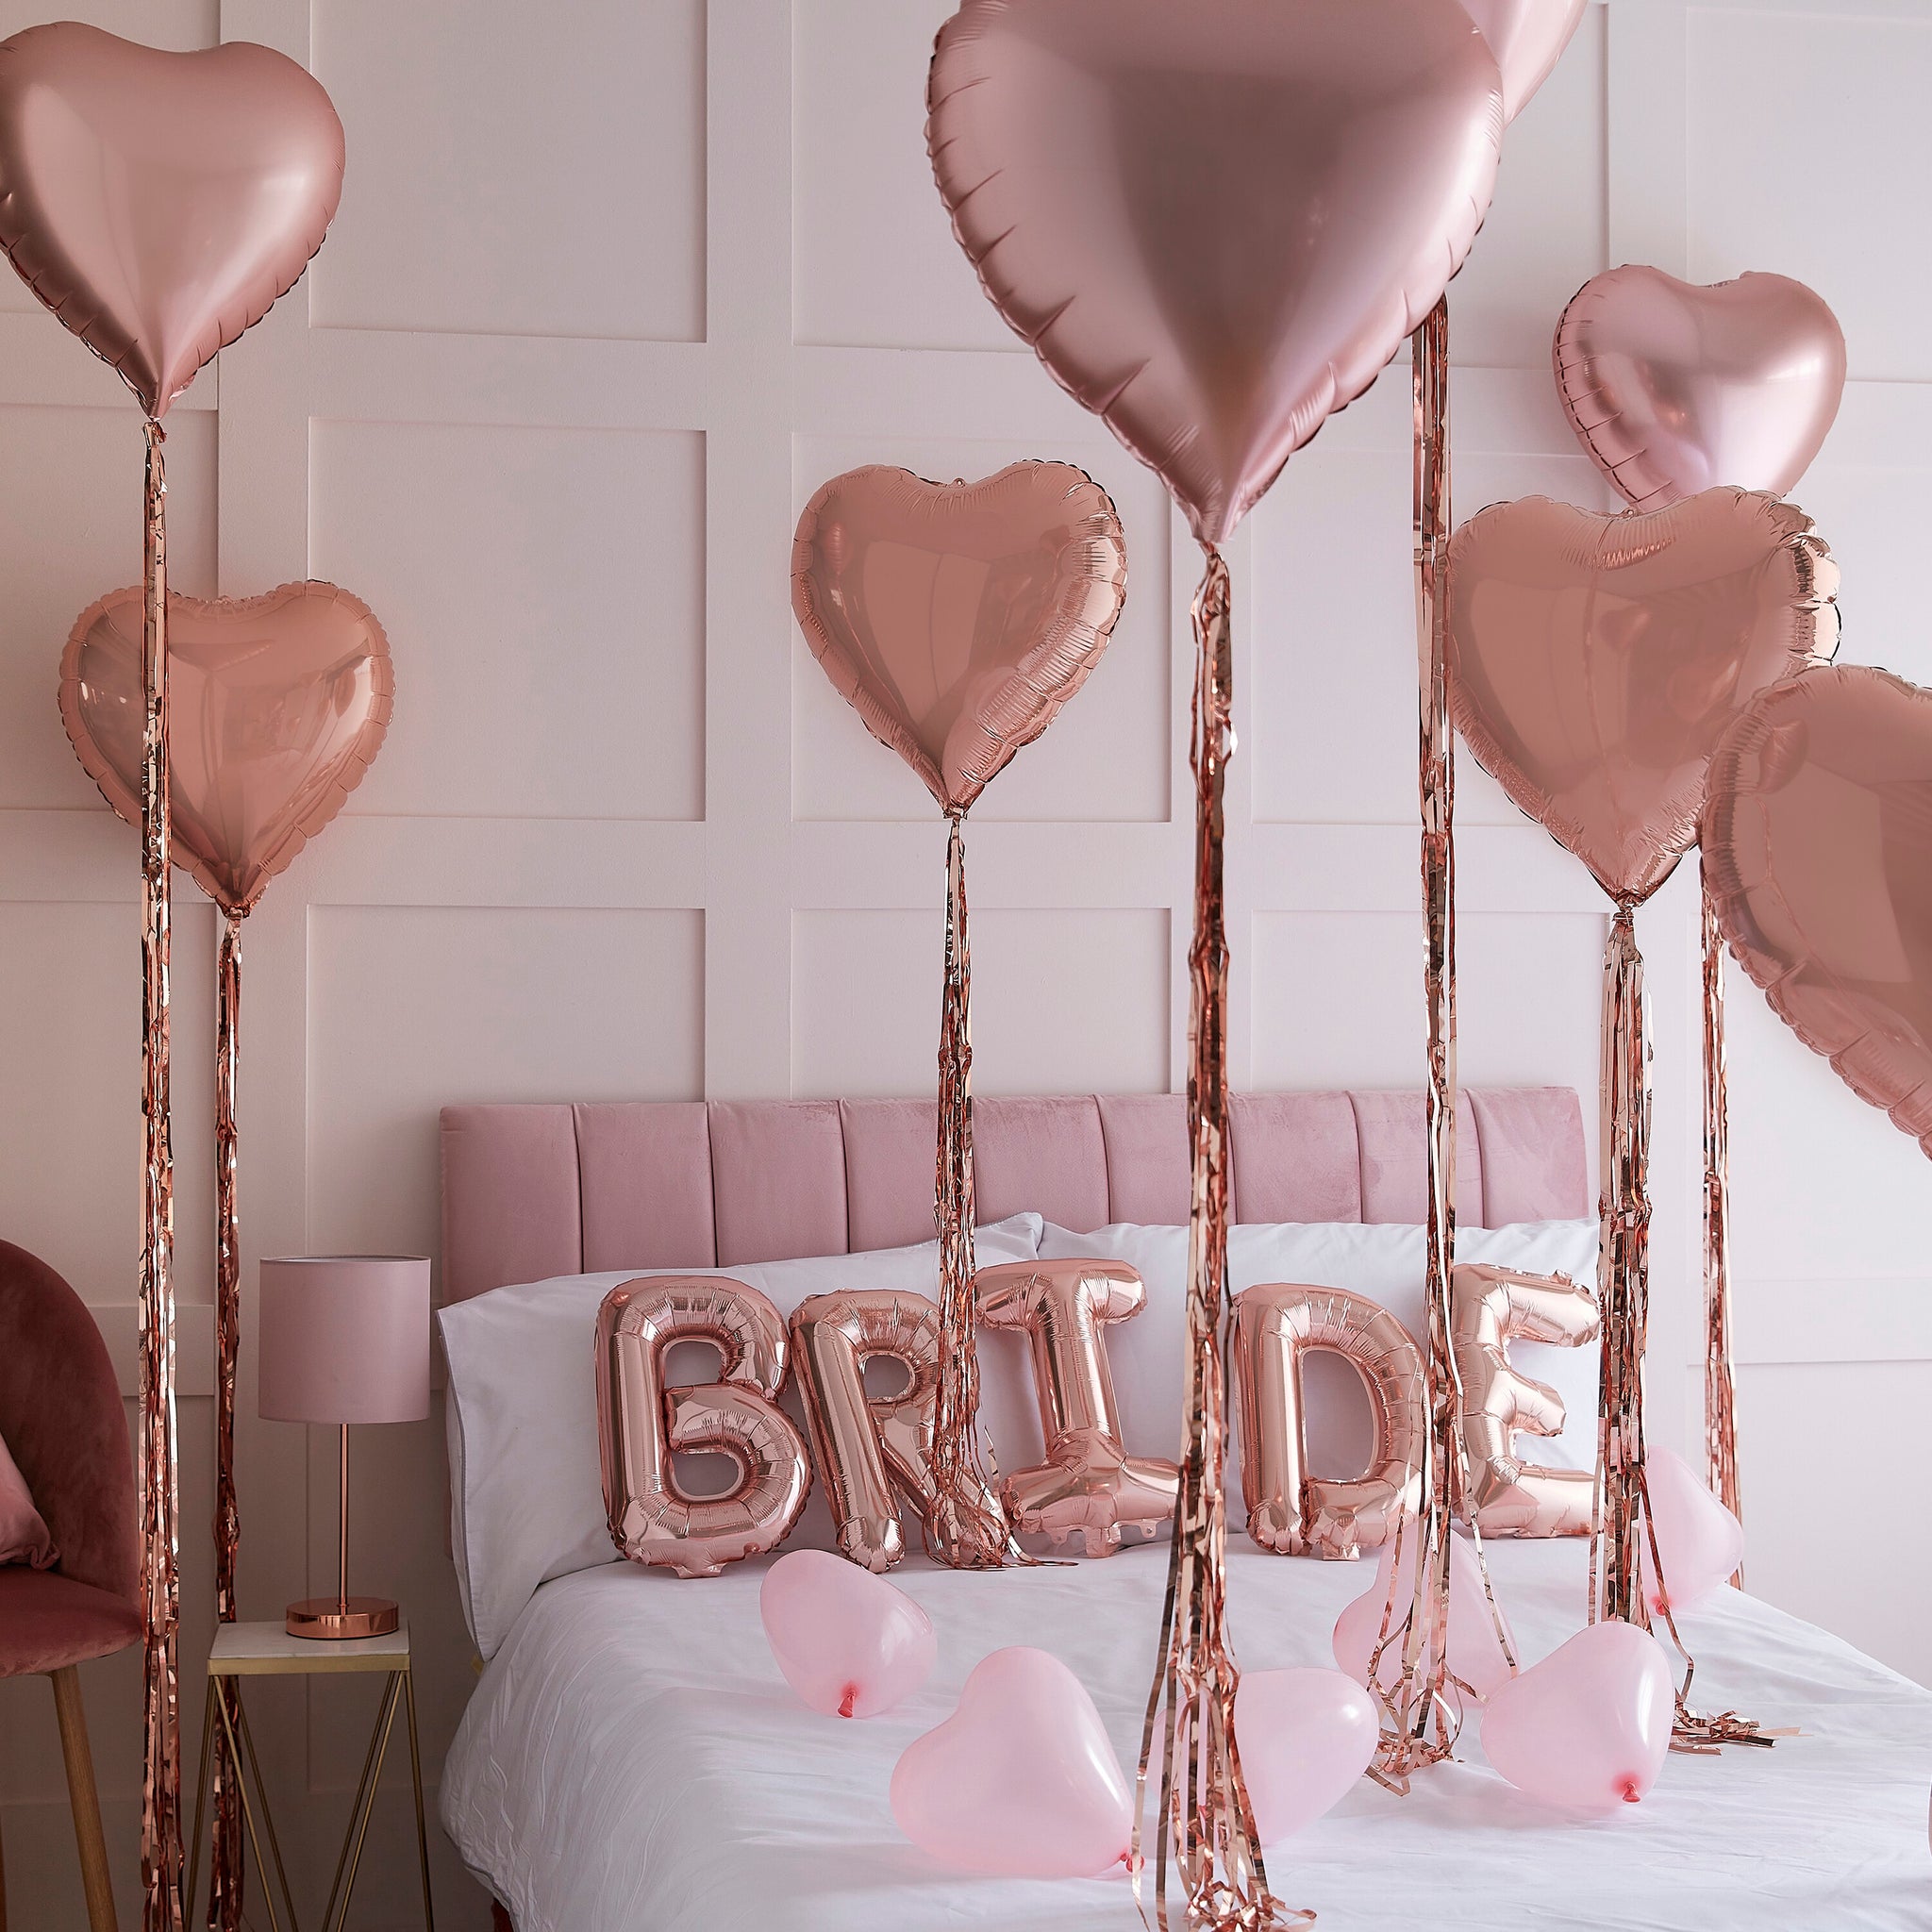 Bride and Heart Balloons Room Decoration Kit - Blush Hen Party